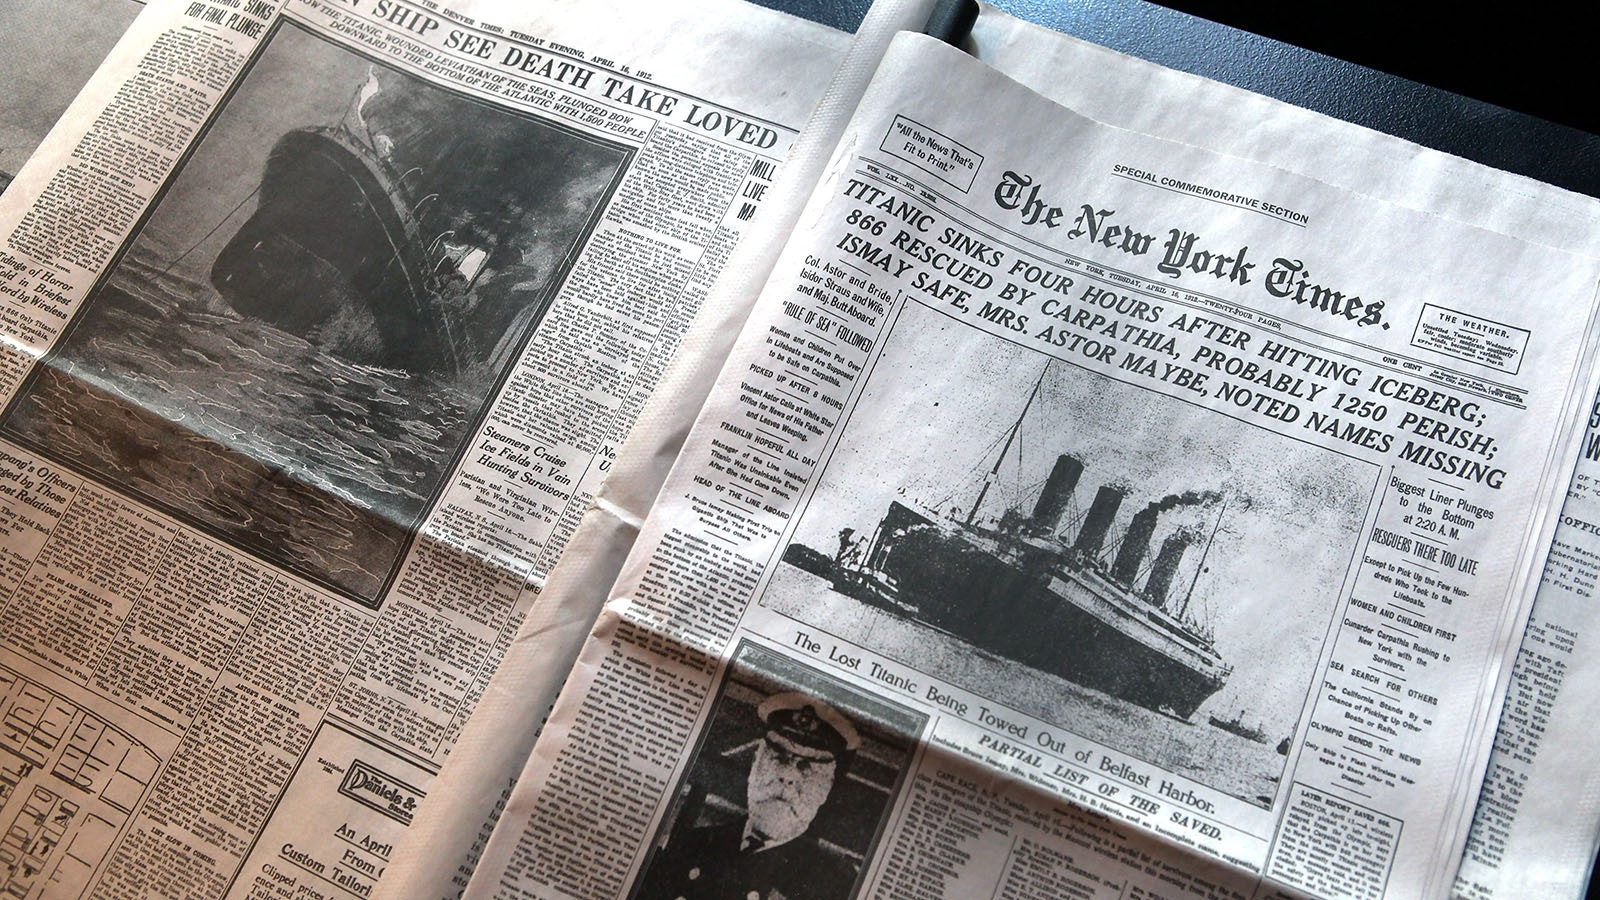 The front page of The New York Times on April 15, 1912, details the sinking of the RMS Titanic at the opening of the "Titanic at 100: Myth and Memory" exhibition on April 10, 2012, in New York City.